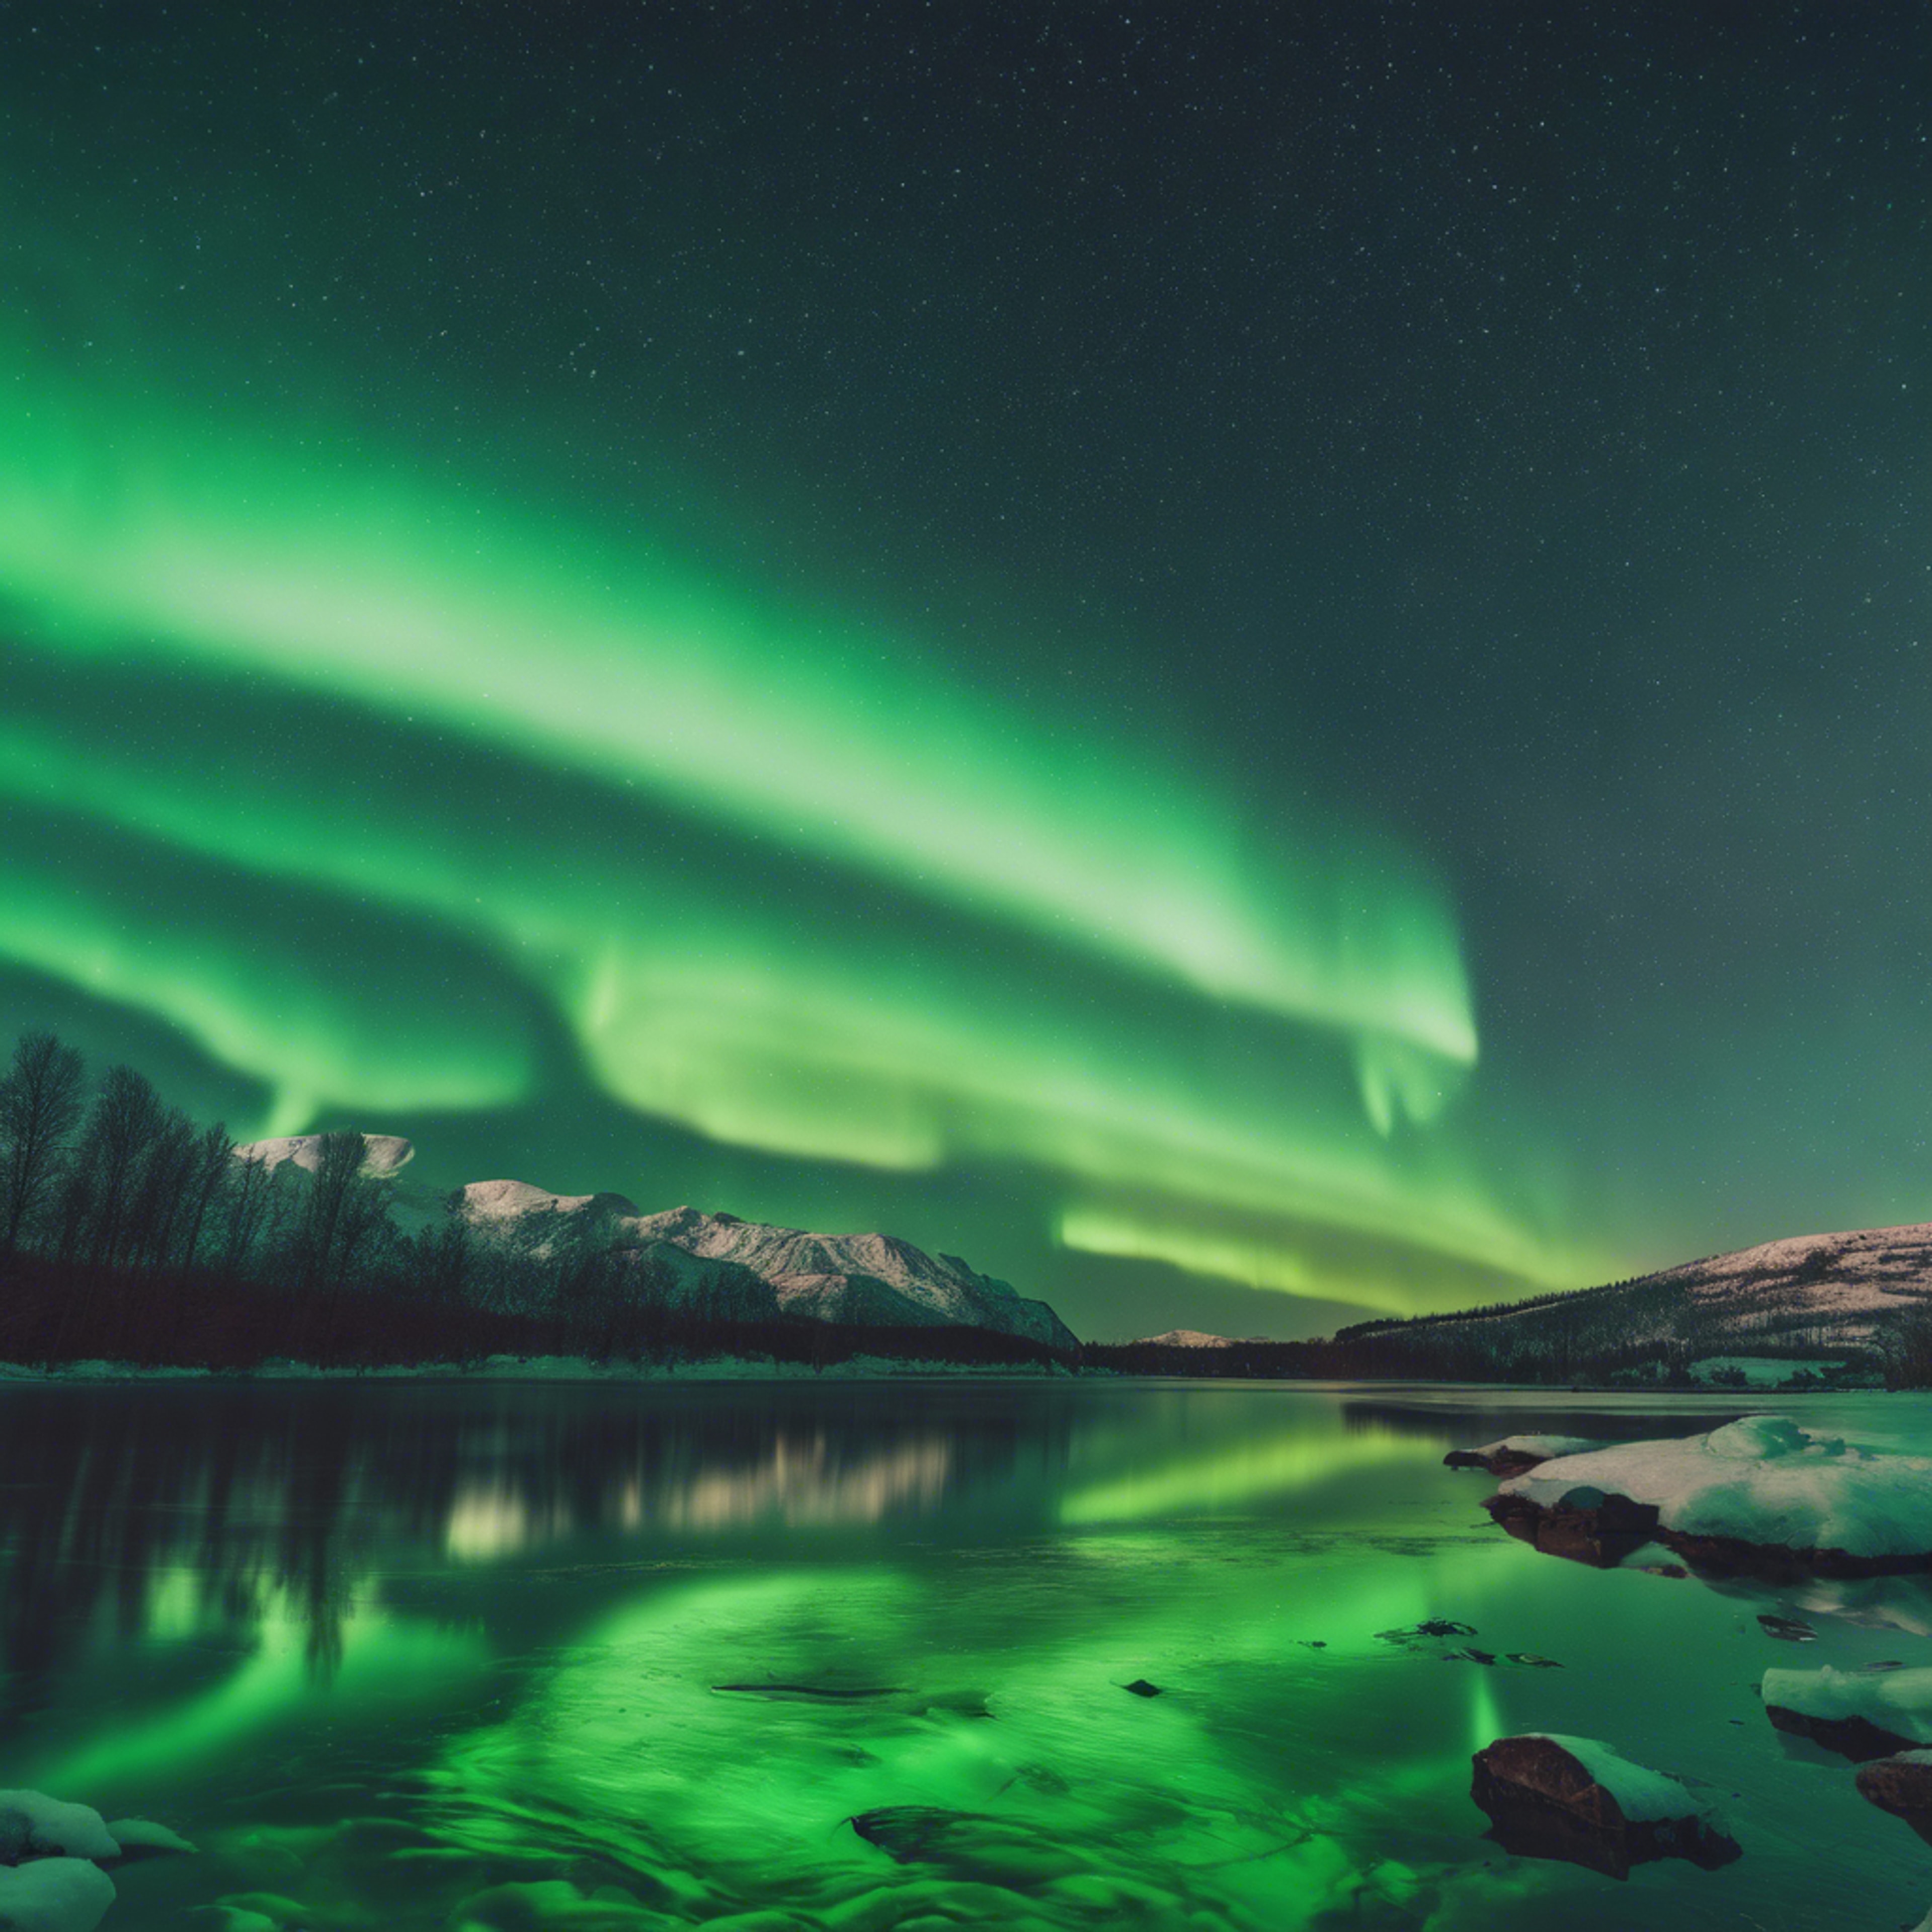 Cool green aurora borealis in the night sky. Wallpaper[6739bc2aef4a46929ef0]